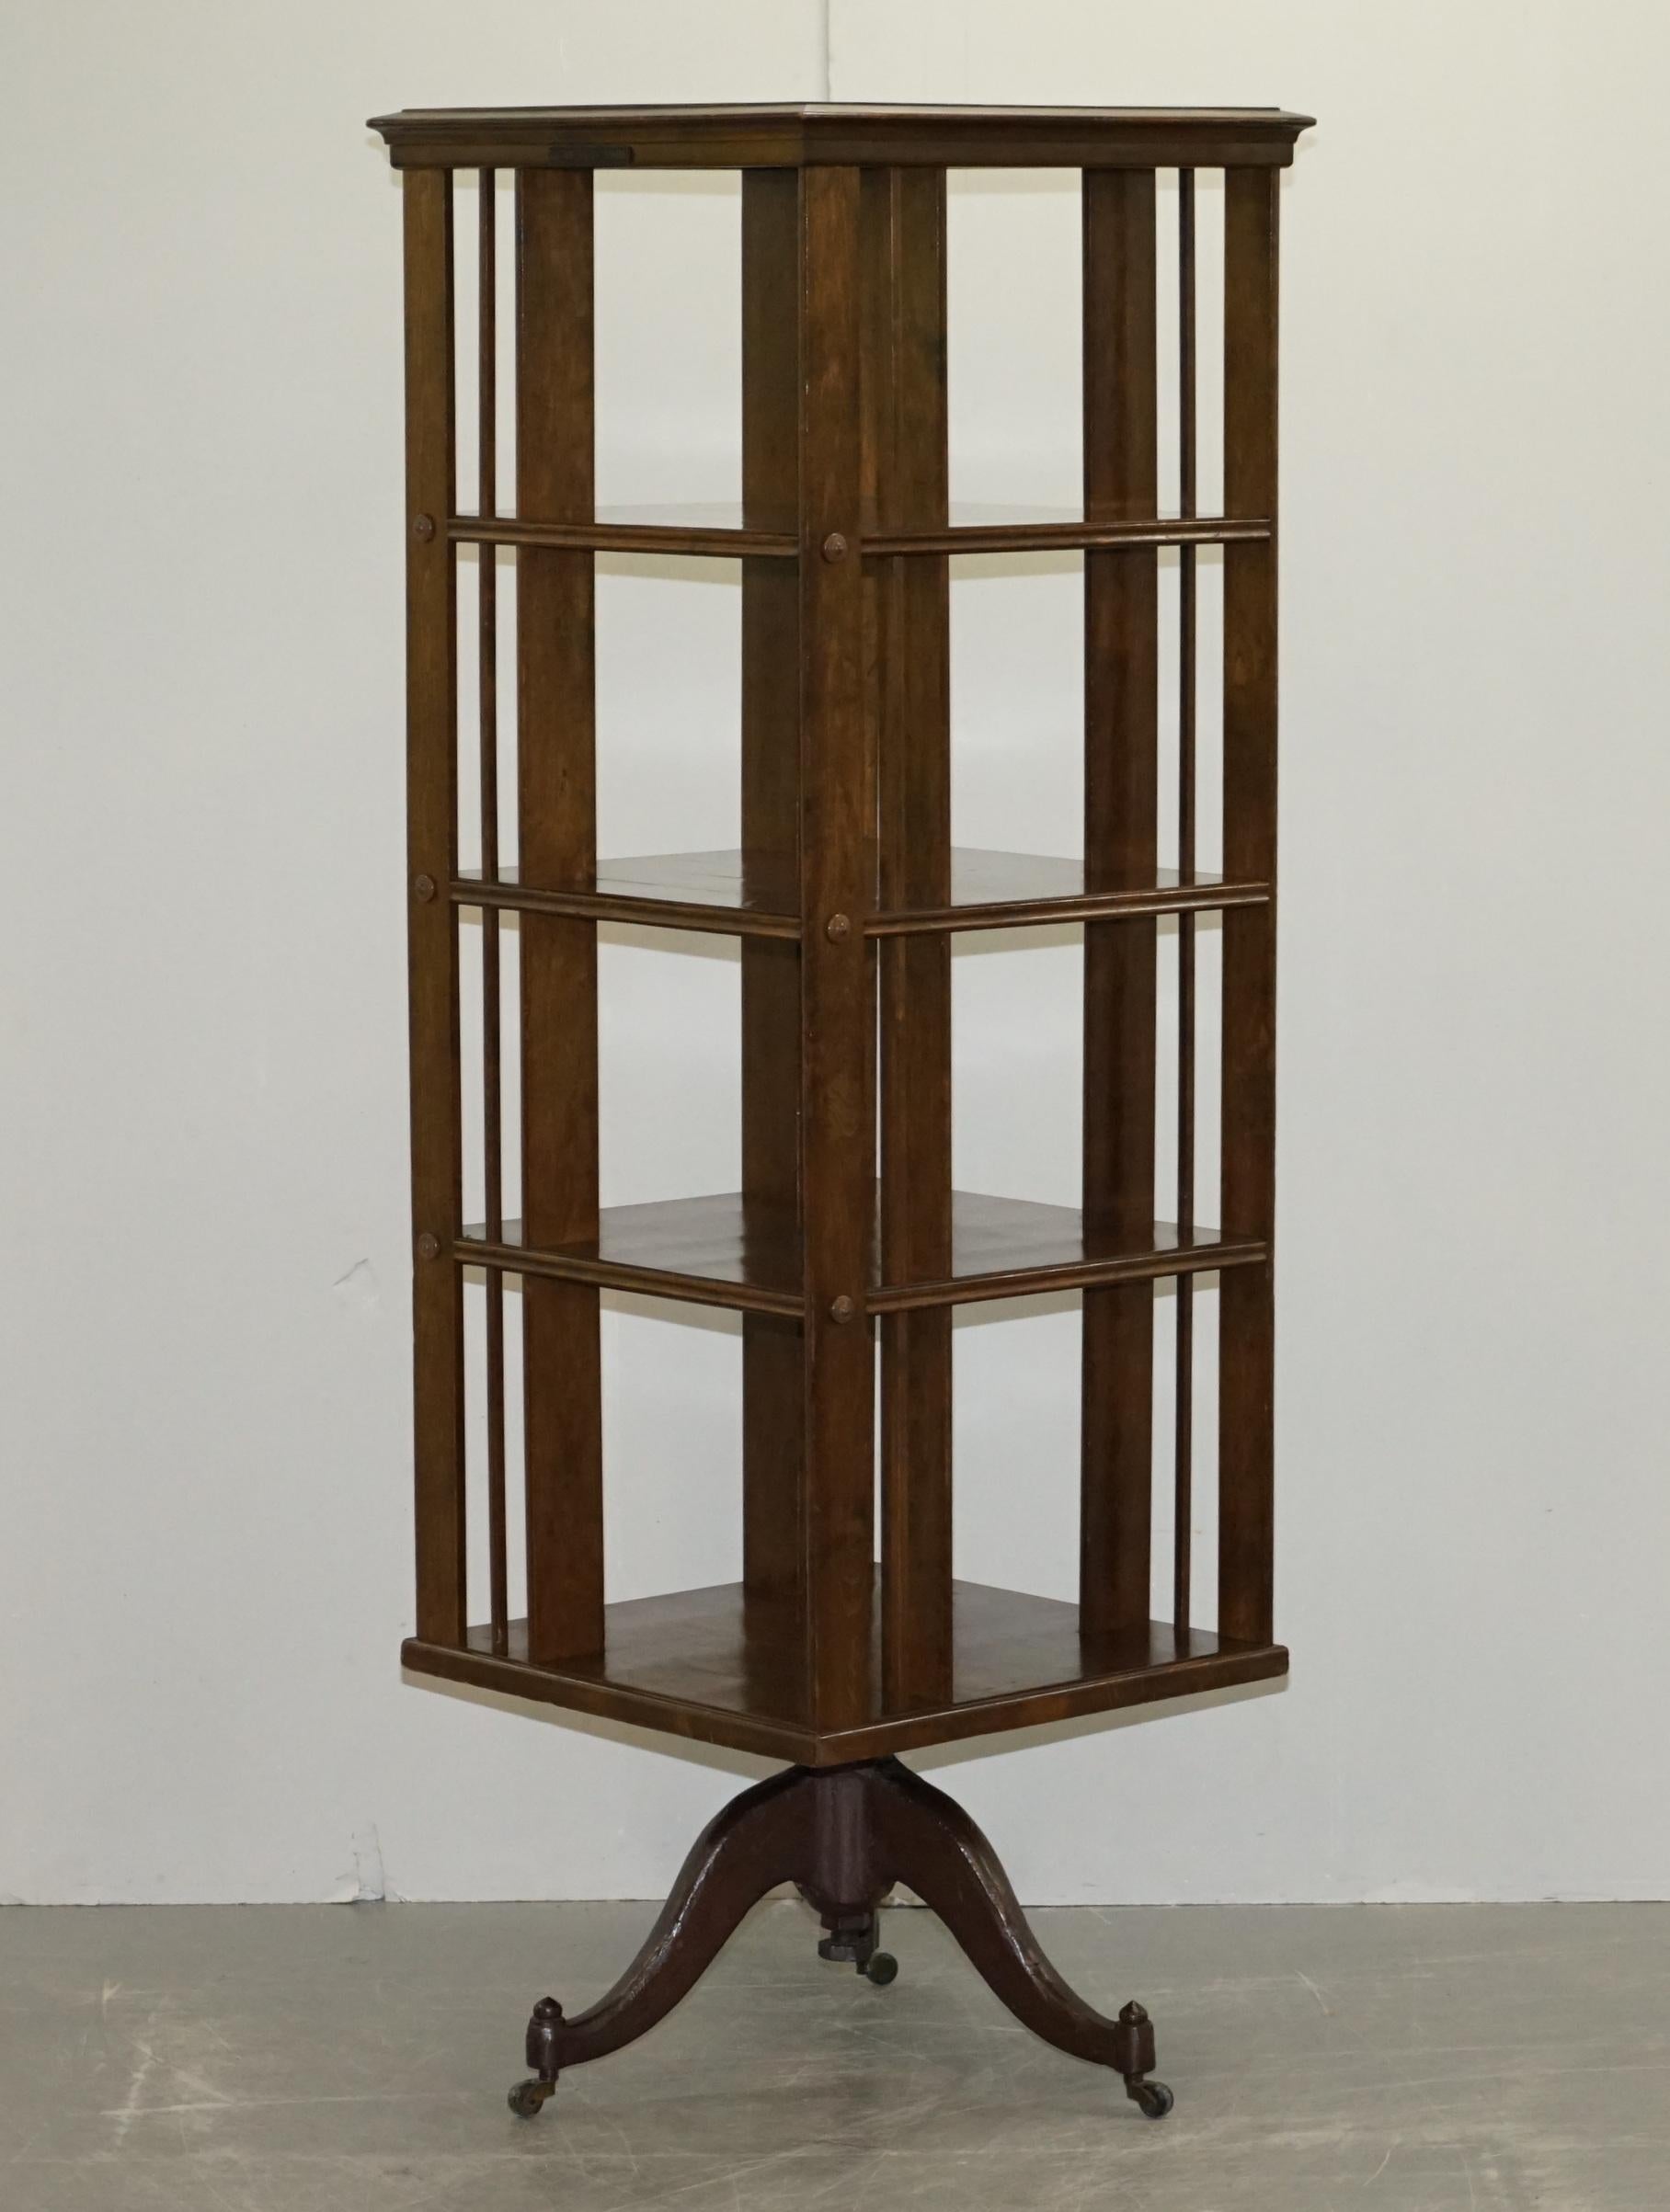 We are delighted to offer this really very nice and highly collectable solid oak exceptionally large Edwardian Library revolving bookcase 

This is the tallest of this type I have ever seen, its honestly massive. You can fit a small library in